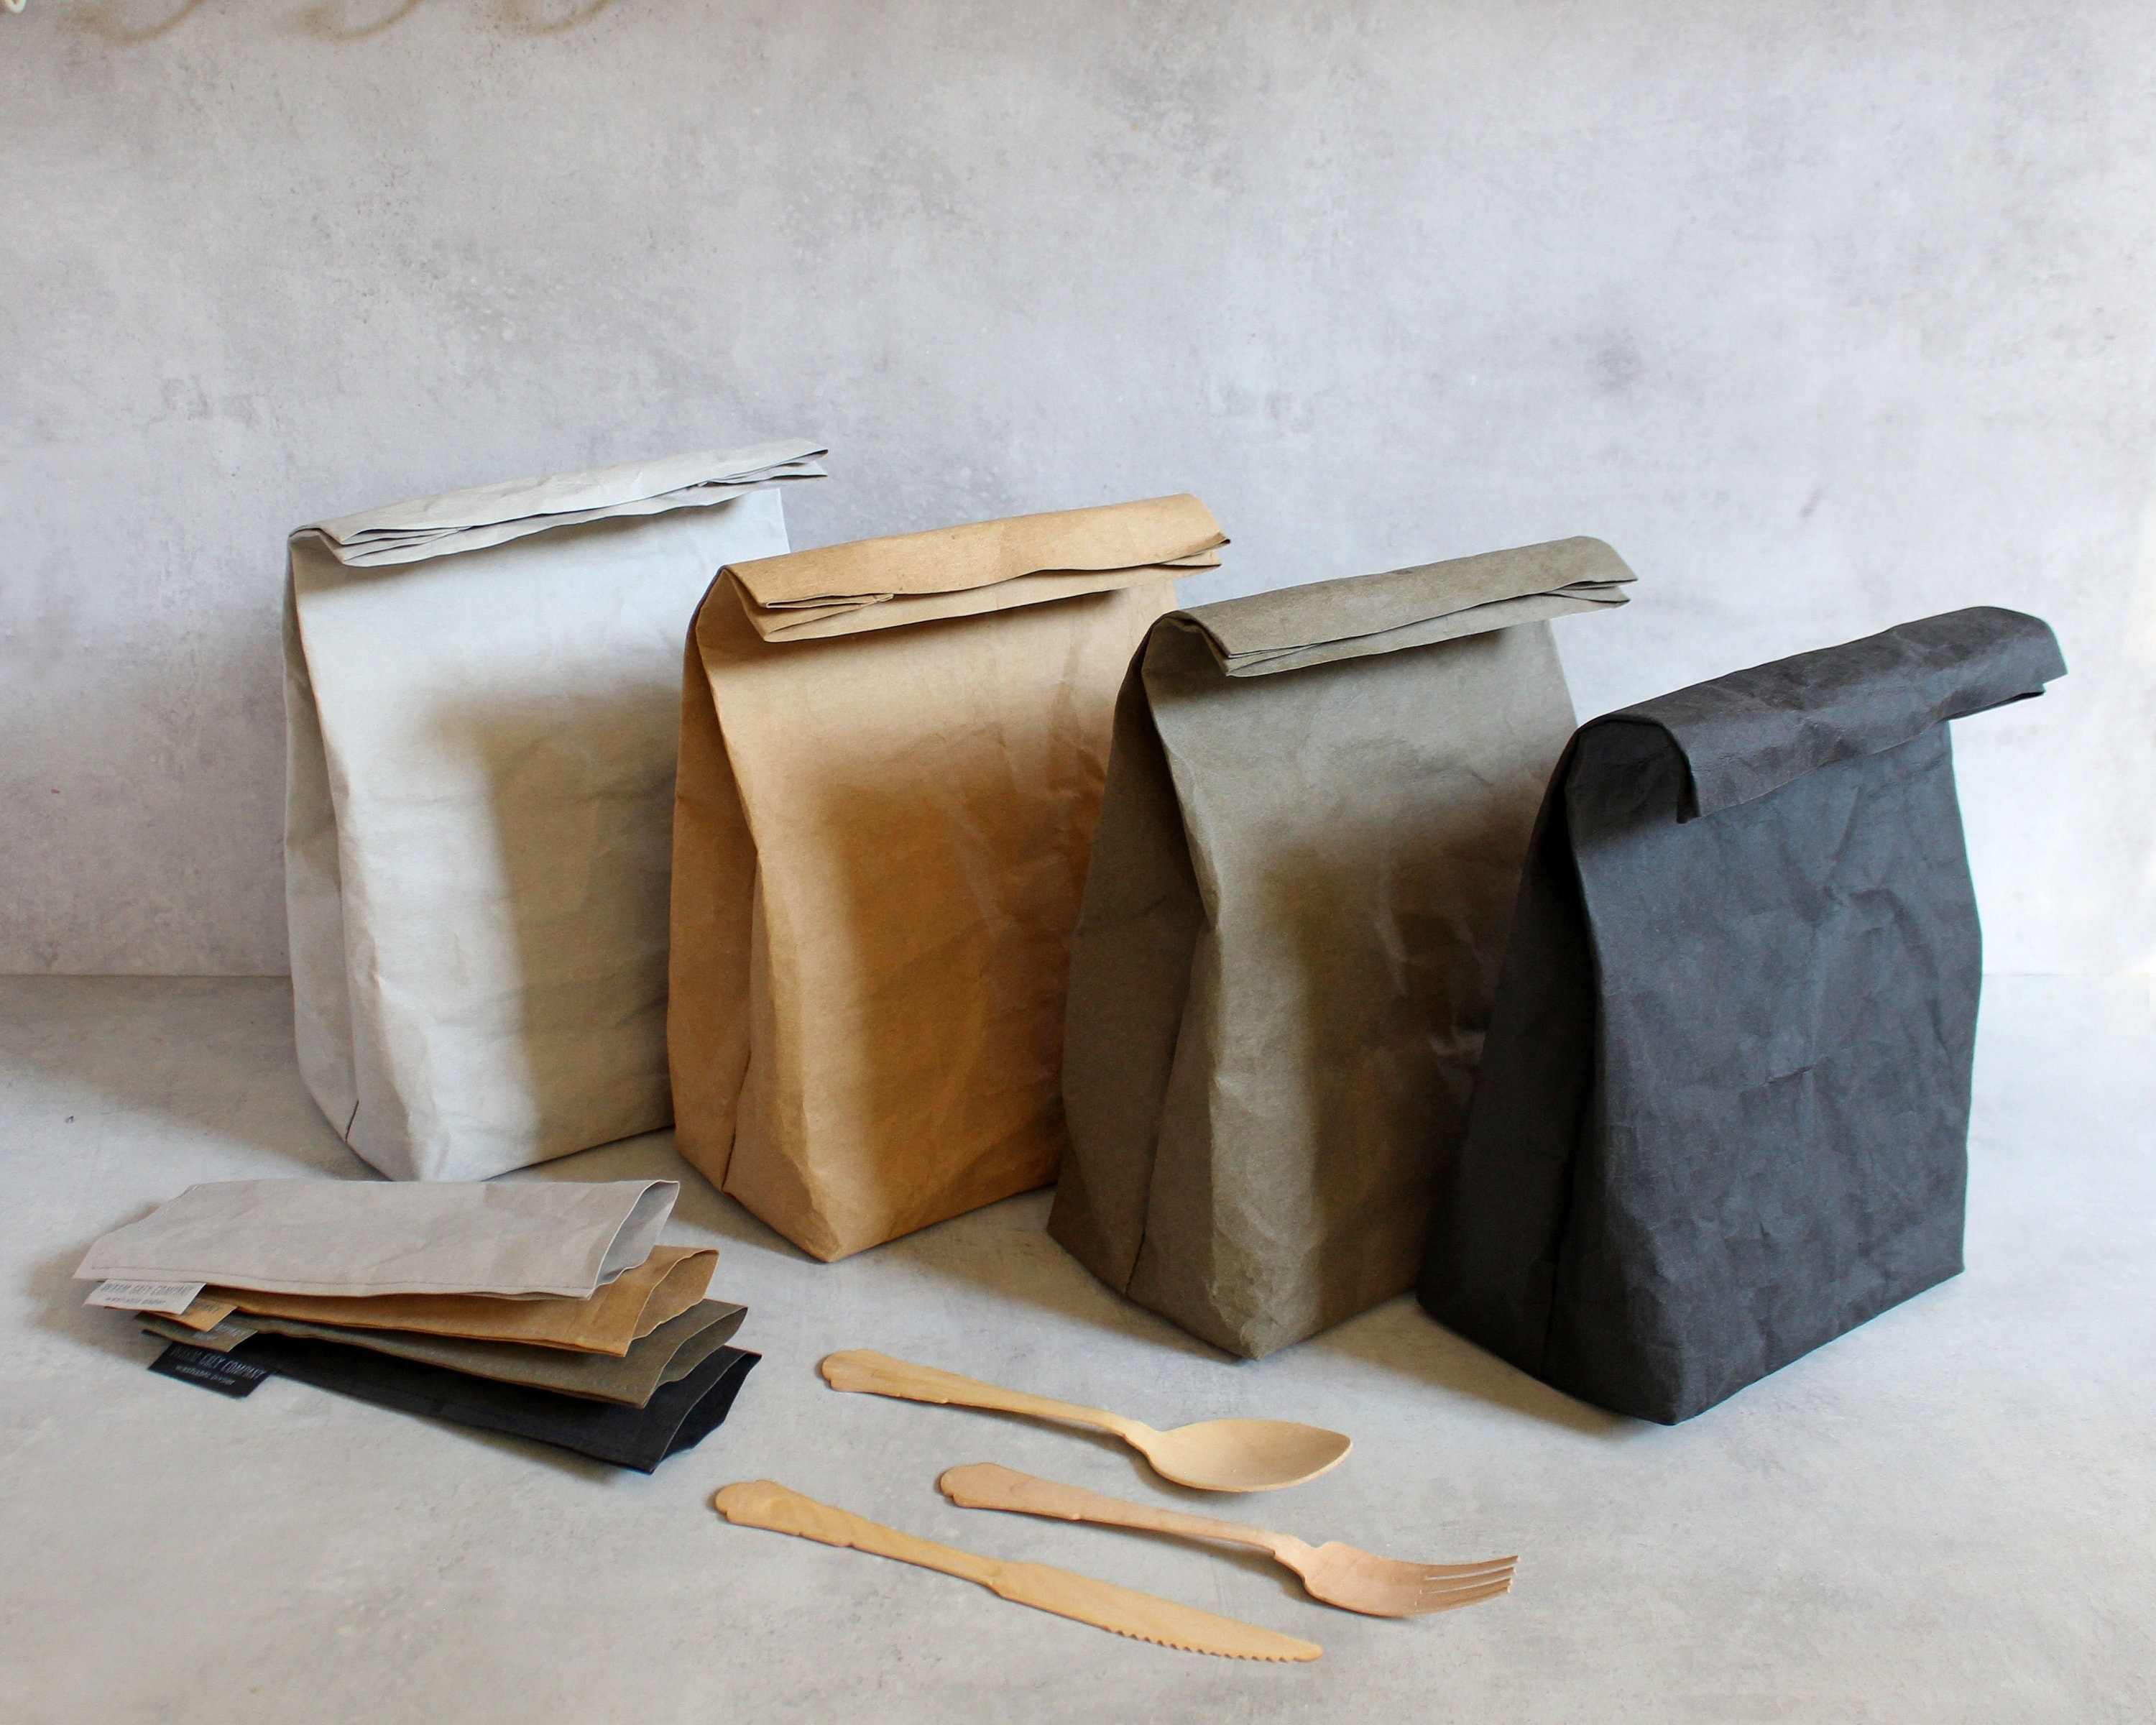 made from TYVEK IM A Brown Paper Bag Reusable Insulated Lunch Bag Closure & Tear Proof 5 Lunch bag with Velcro closure